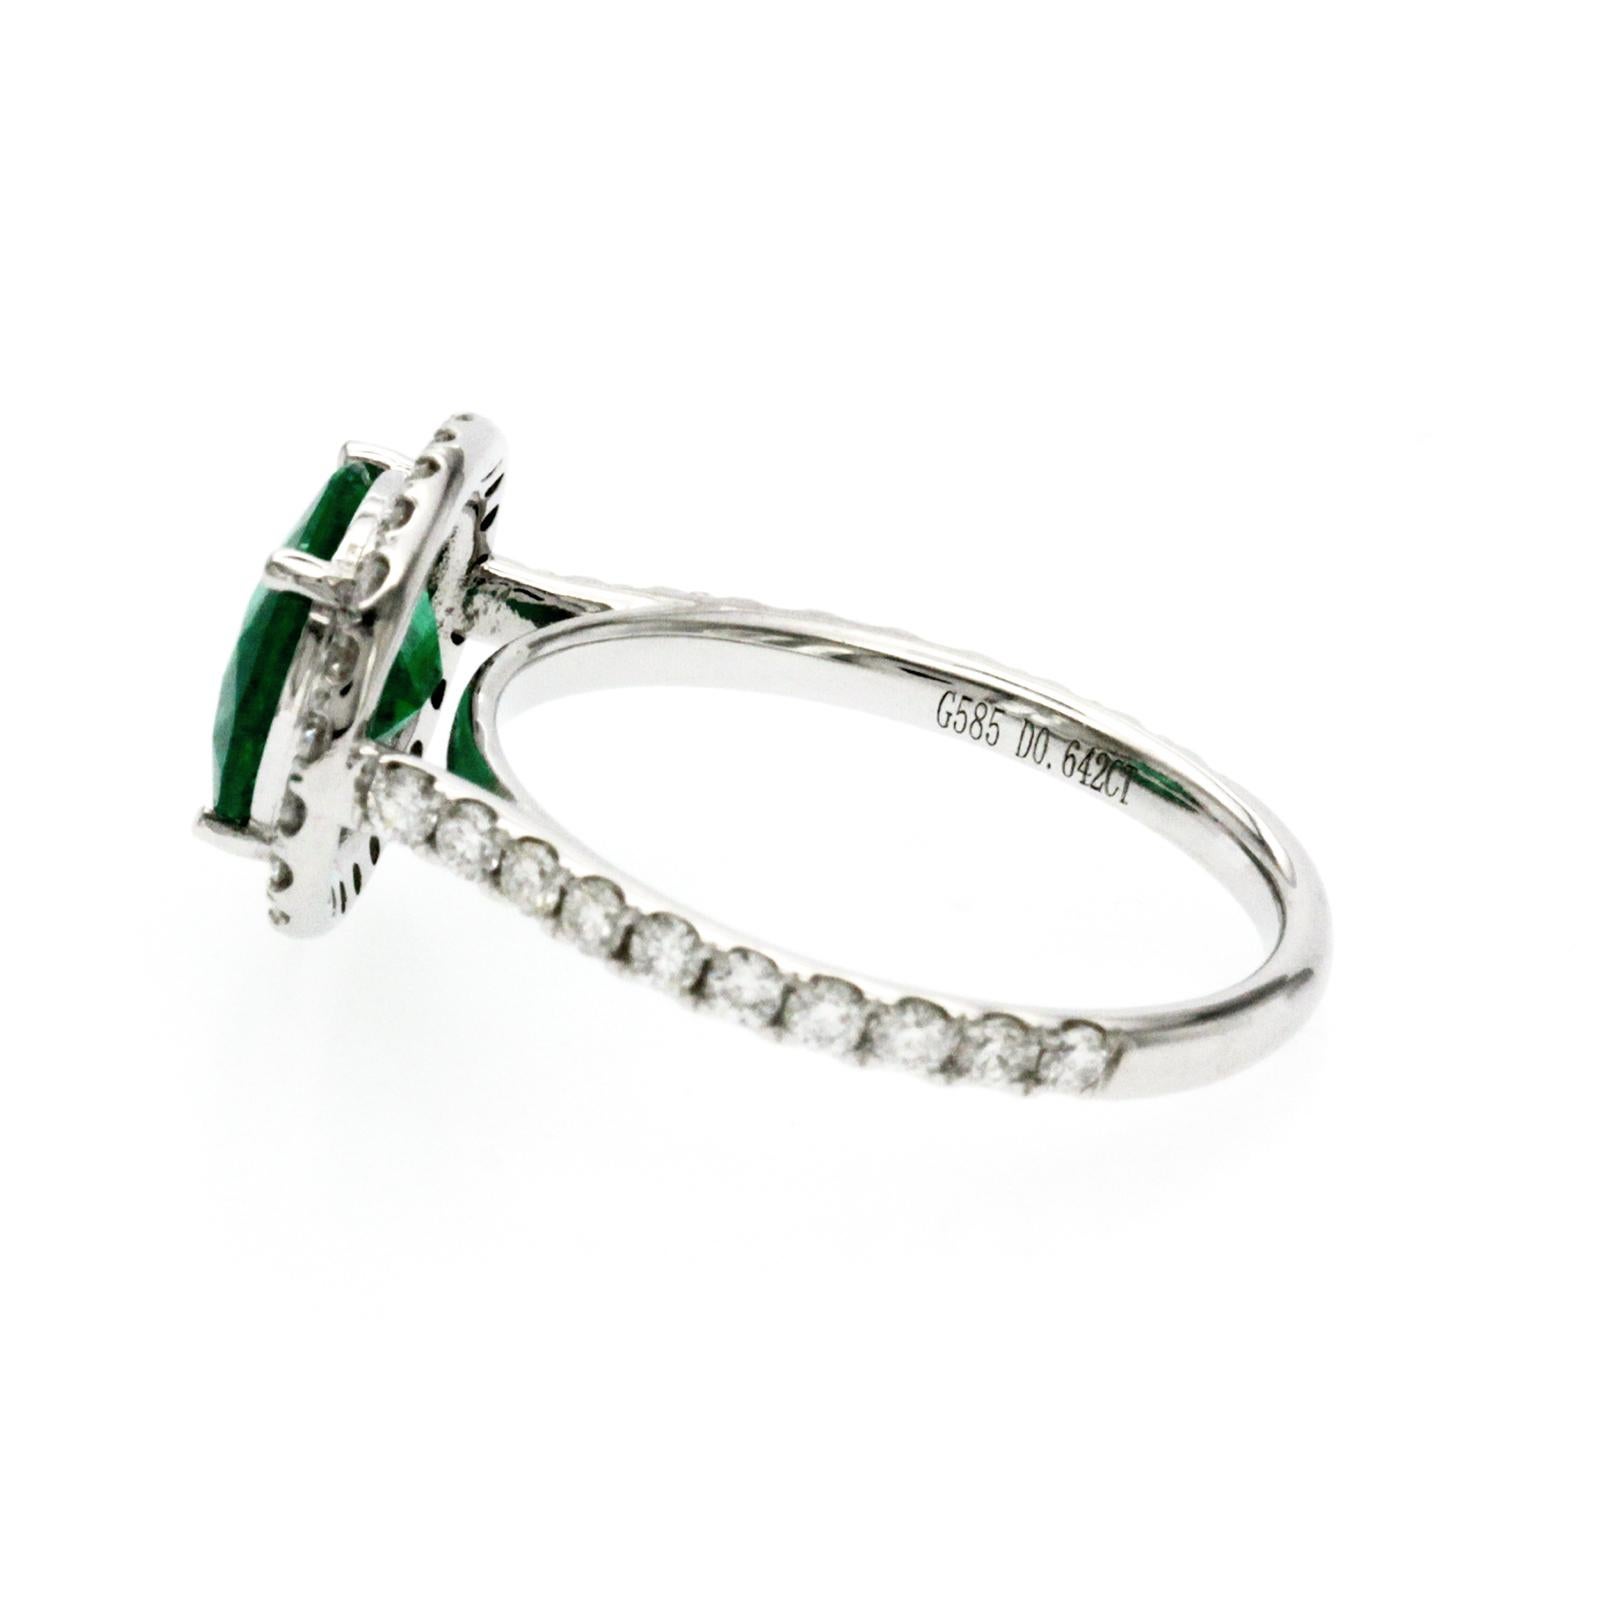 1.87 Ct Zambian Emerald & 0.65 Ct Diamonds in 14K White Gold Engagement Ring In New Condition For Sale In Los Angeles, CA